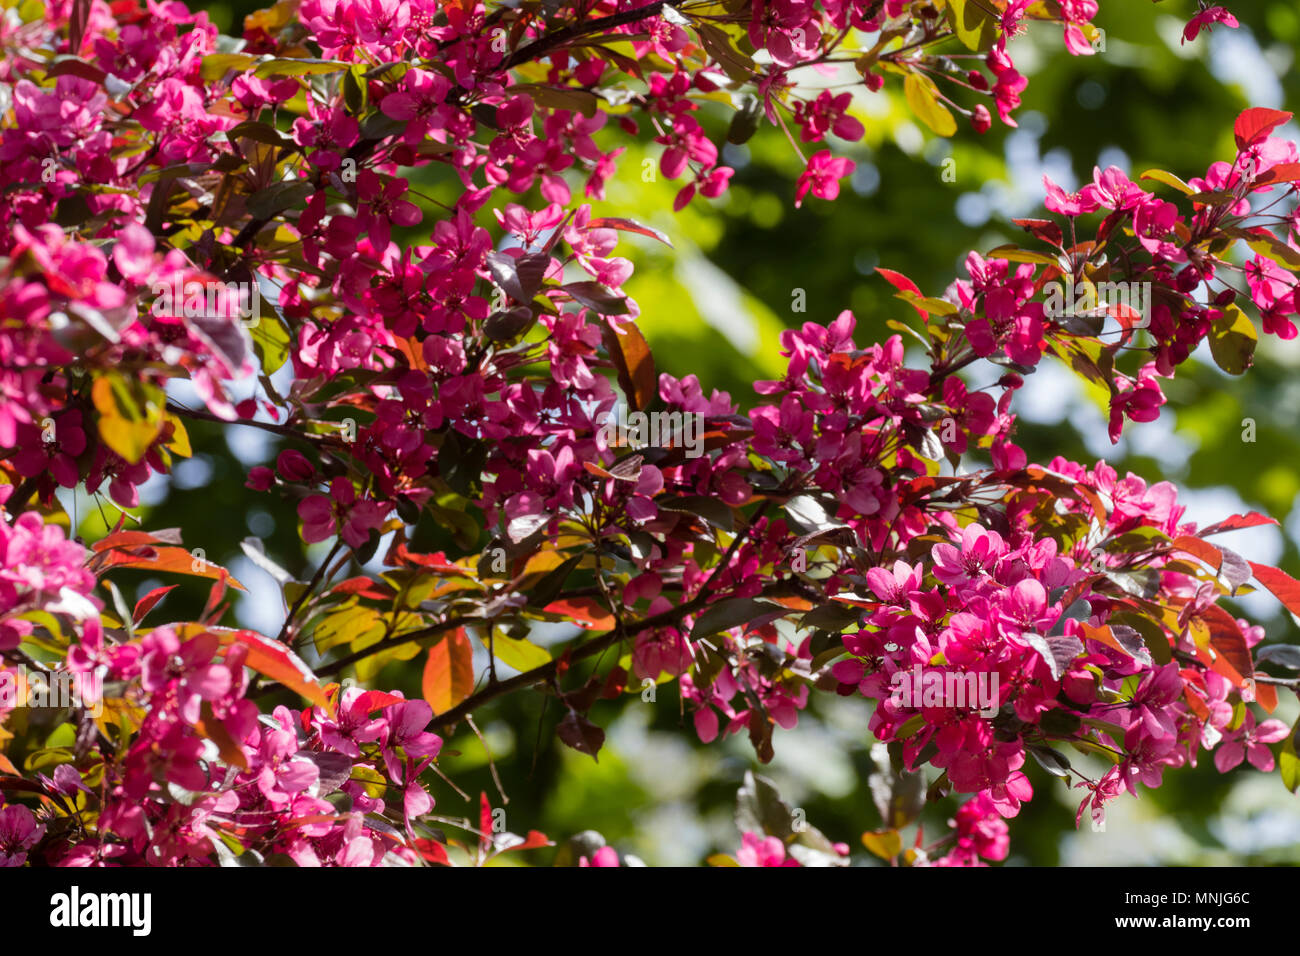 Spring flowers of the deep pink / red crab apple, Malus toringo 'Scarlett' Stock Photo